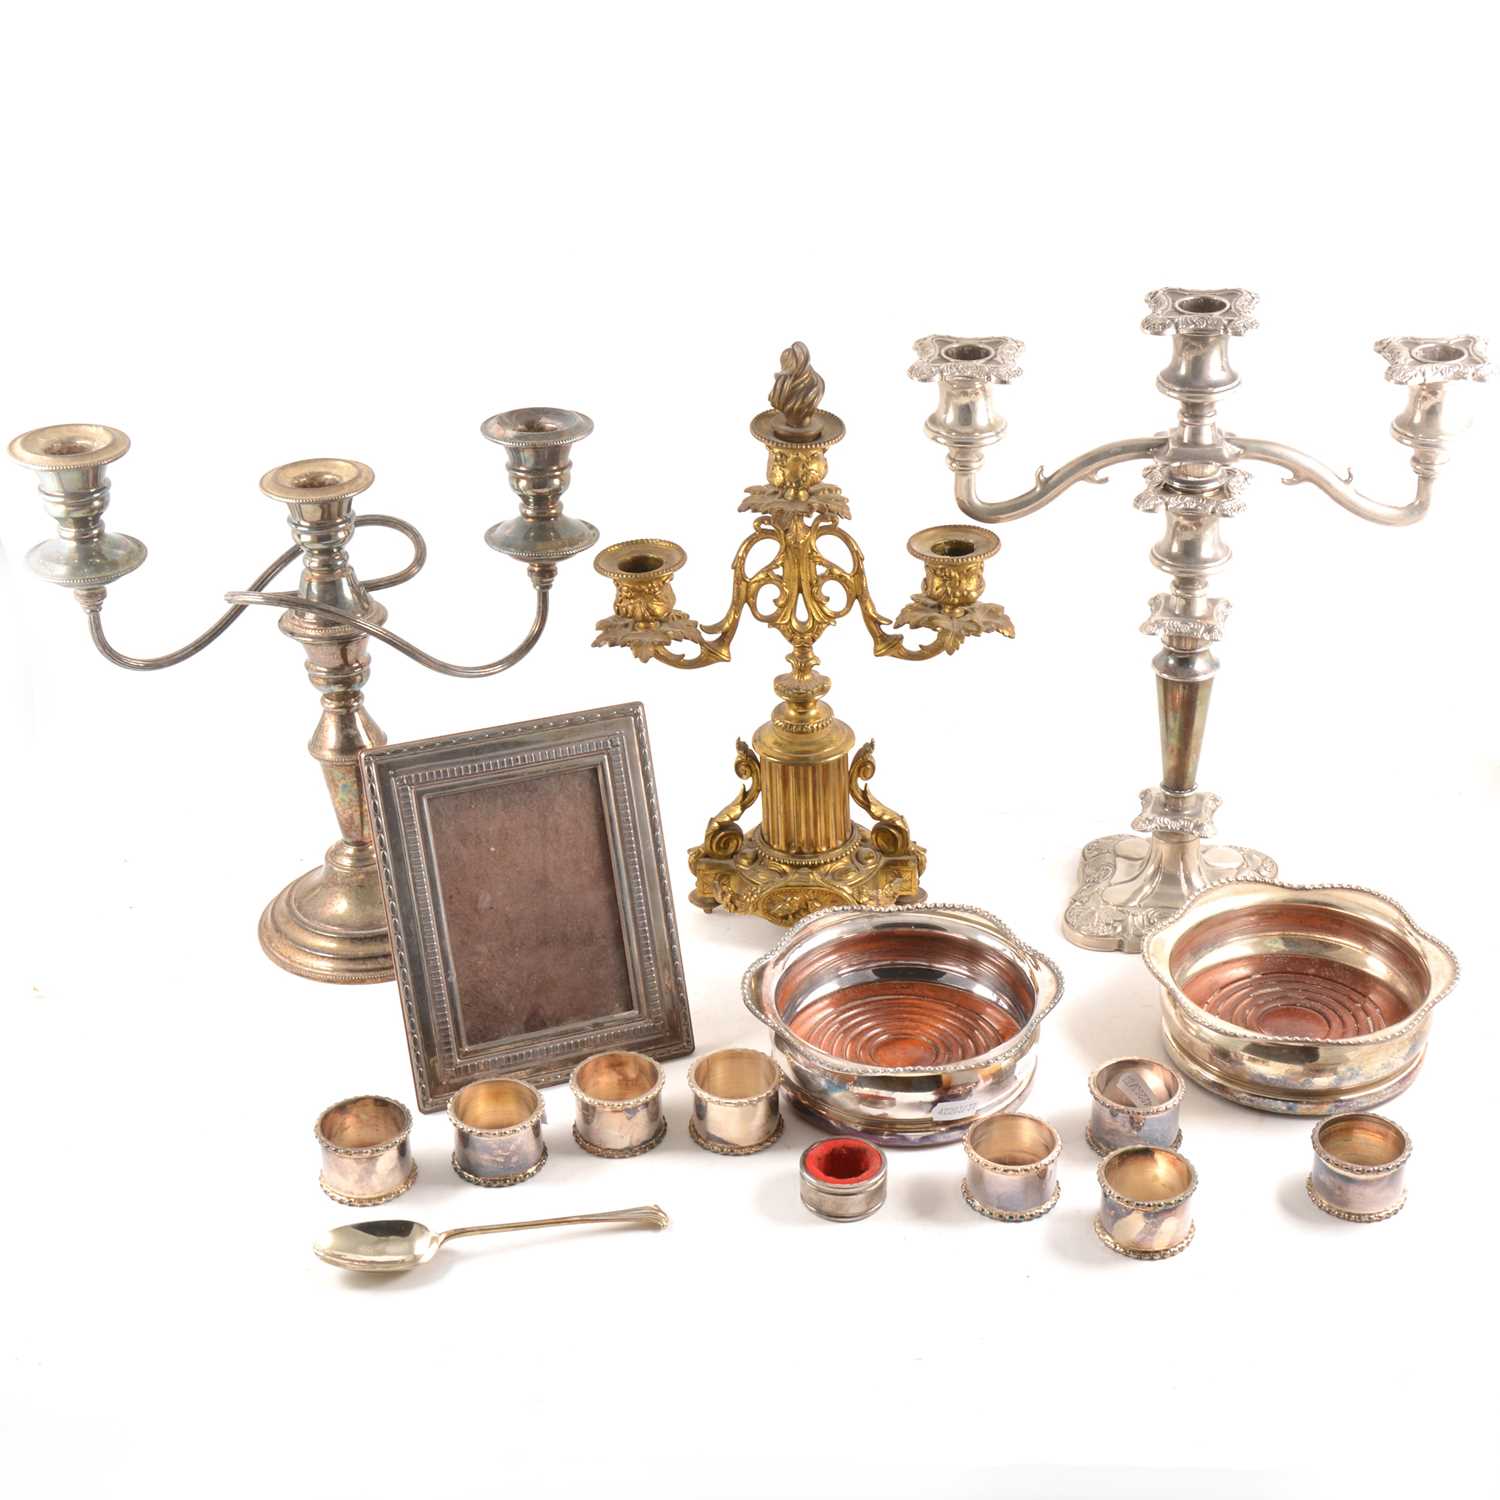 Lot 106 - Silver-faced photograph frame, Georgian silver spoon, and plated wares